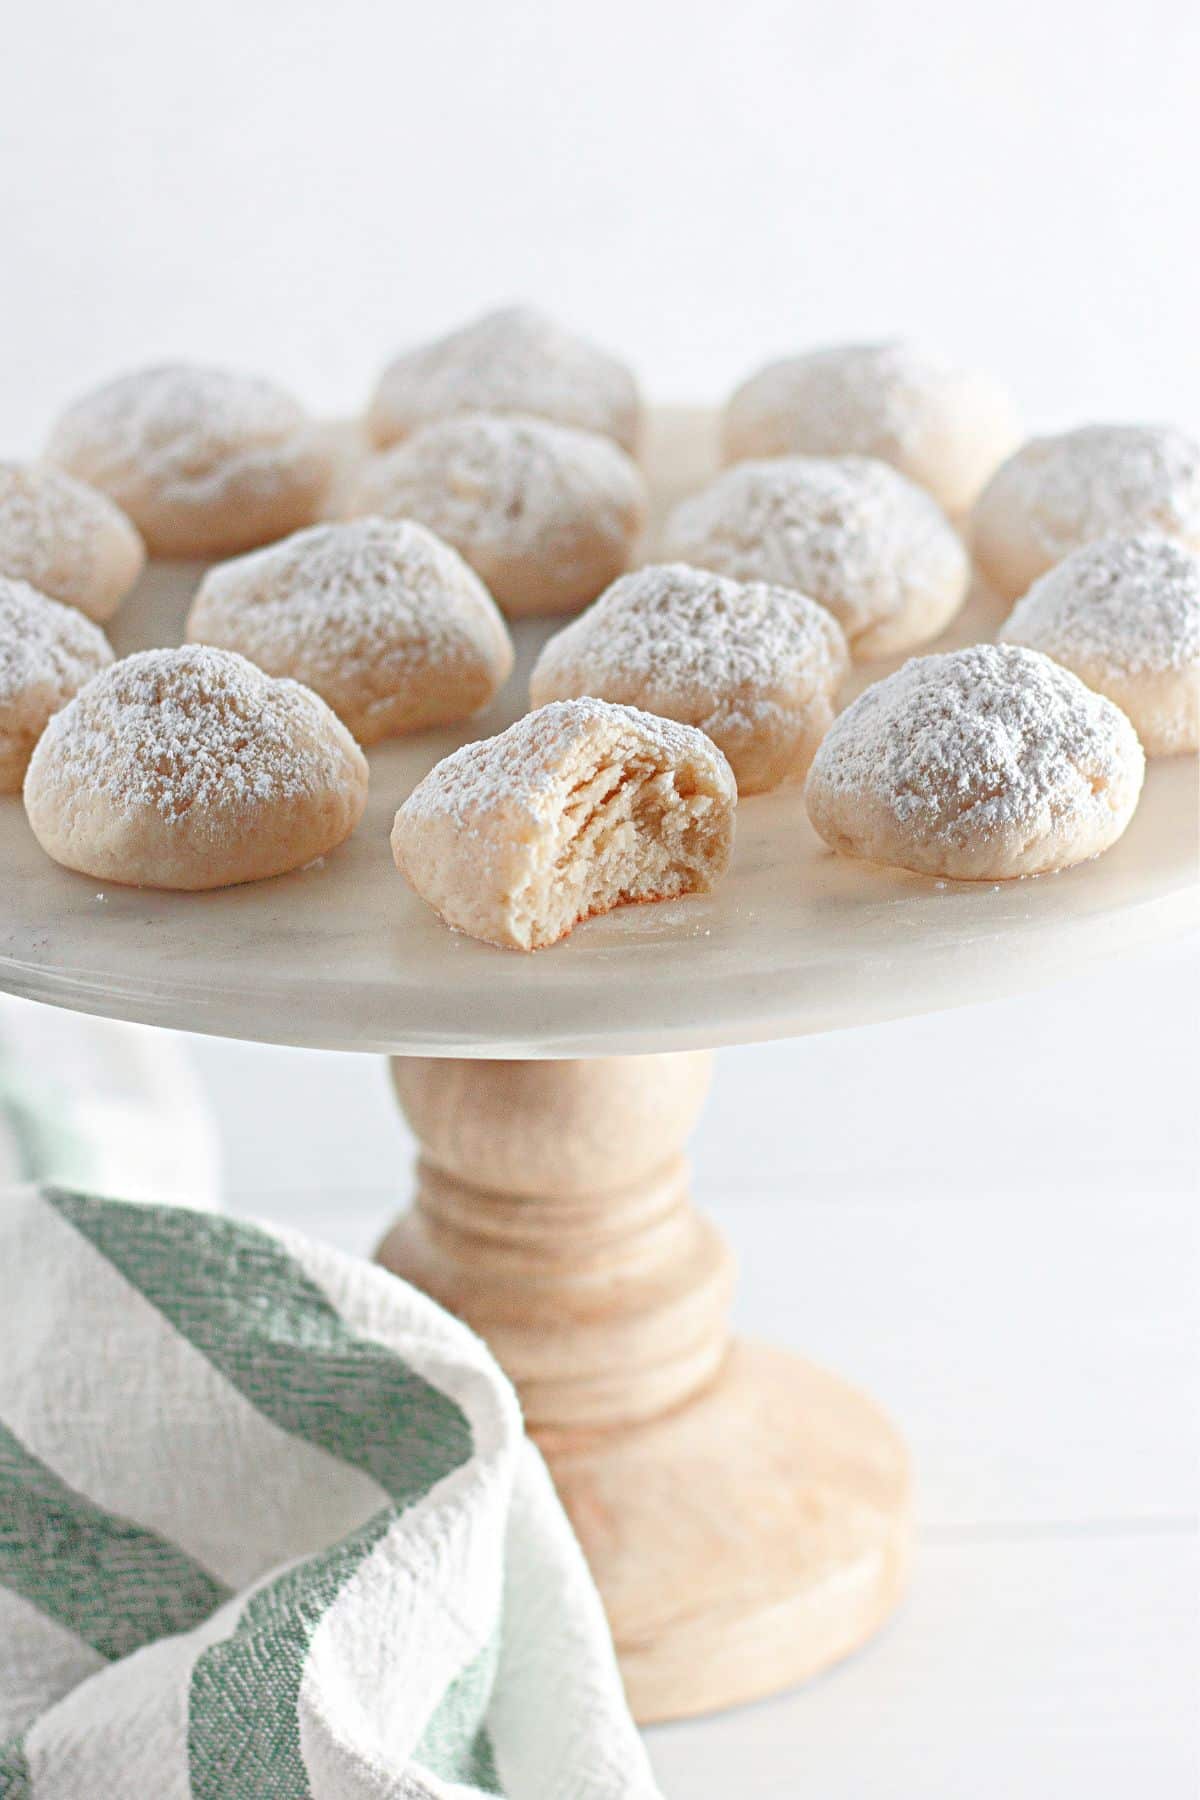 Powdered sugar cream cheese cookies on a cake stand.